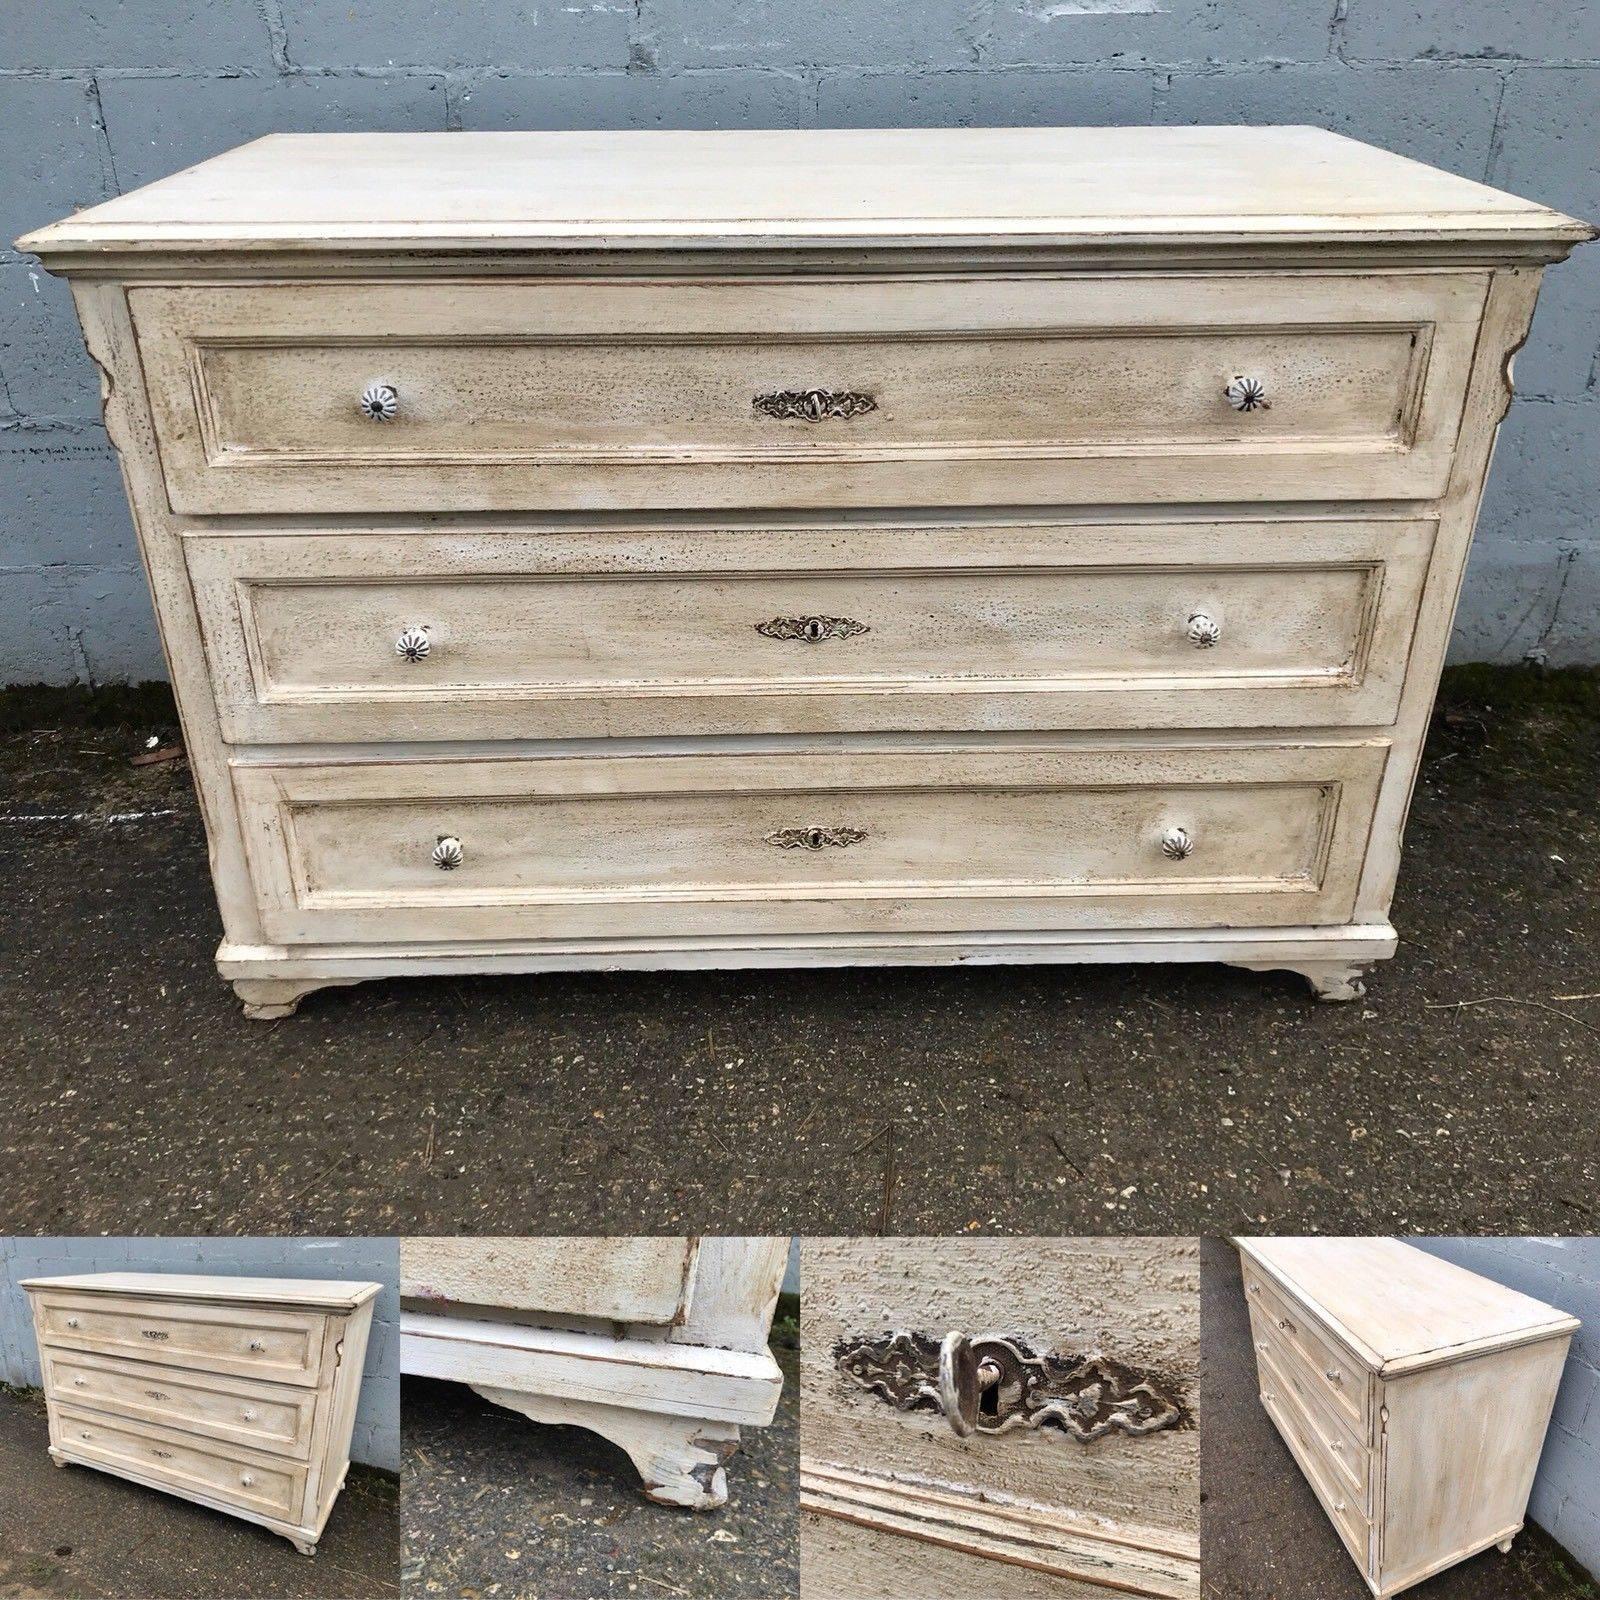 Here we have a beautiful French chest of drawers with lovely patina. All drawers are working perfectly and the paint work is fantastic.

Dimensions: 135 cm long, 60 cm deep, 92 cm